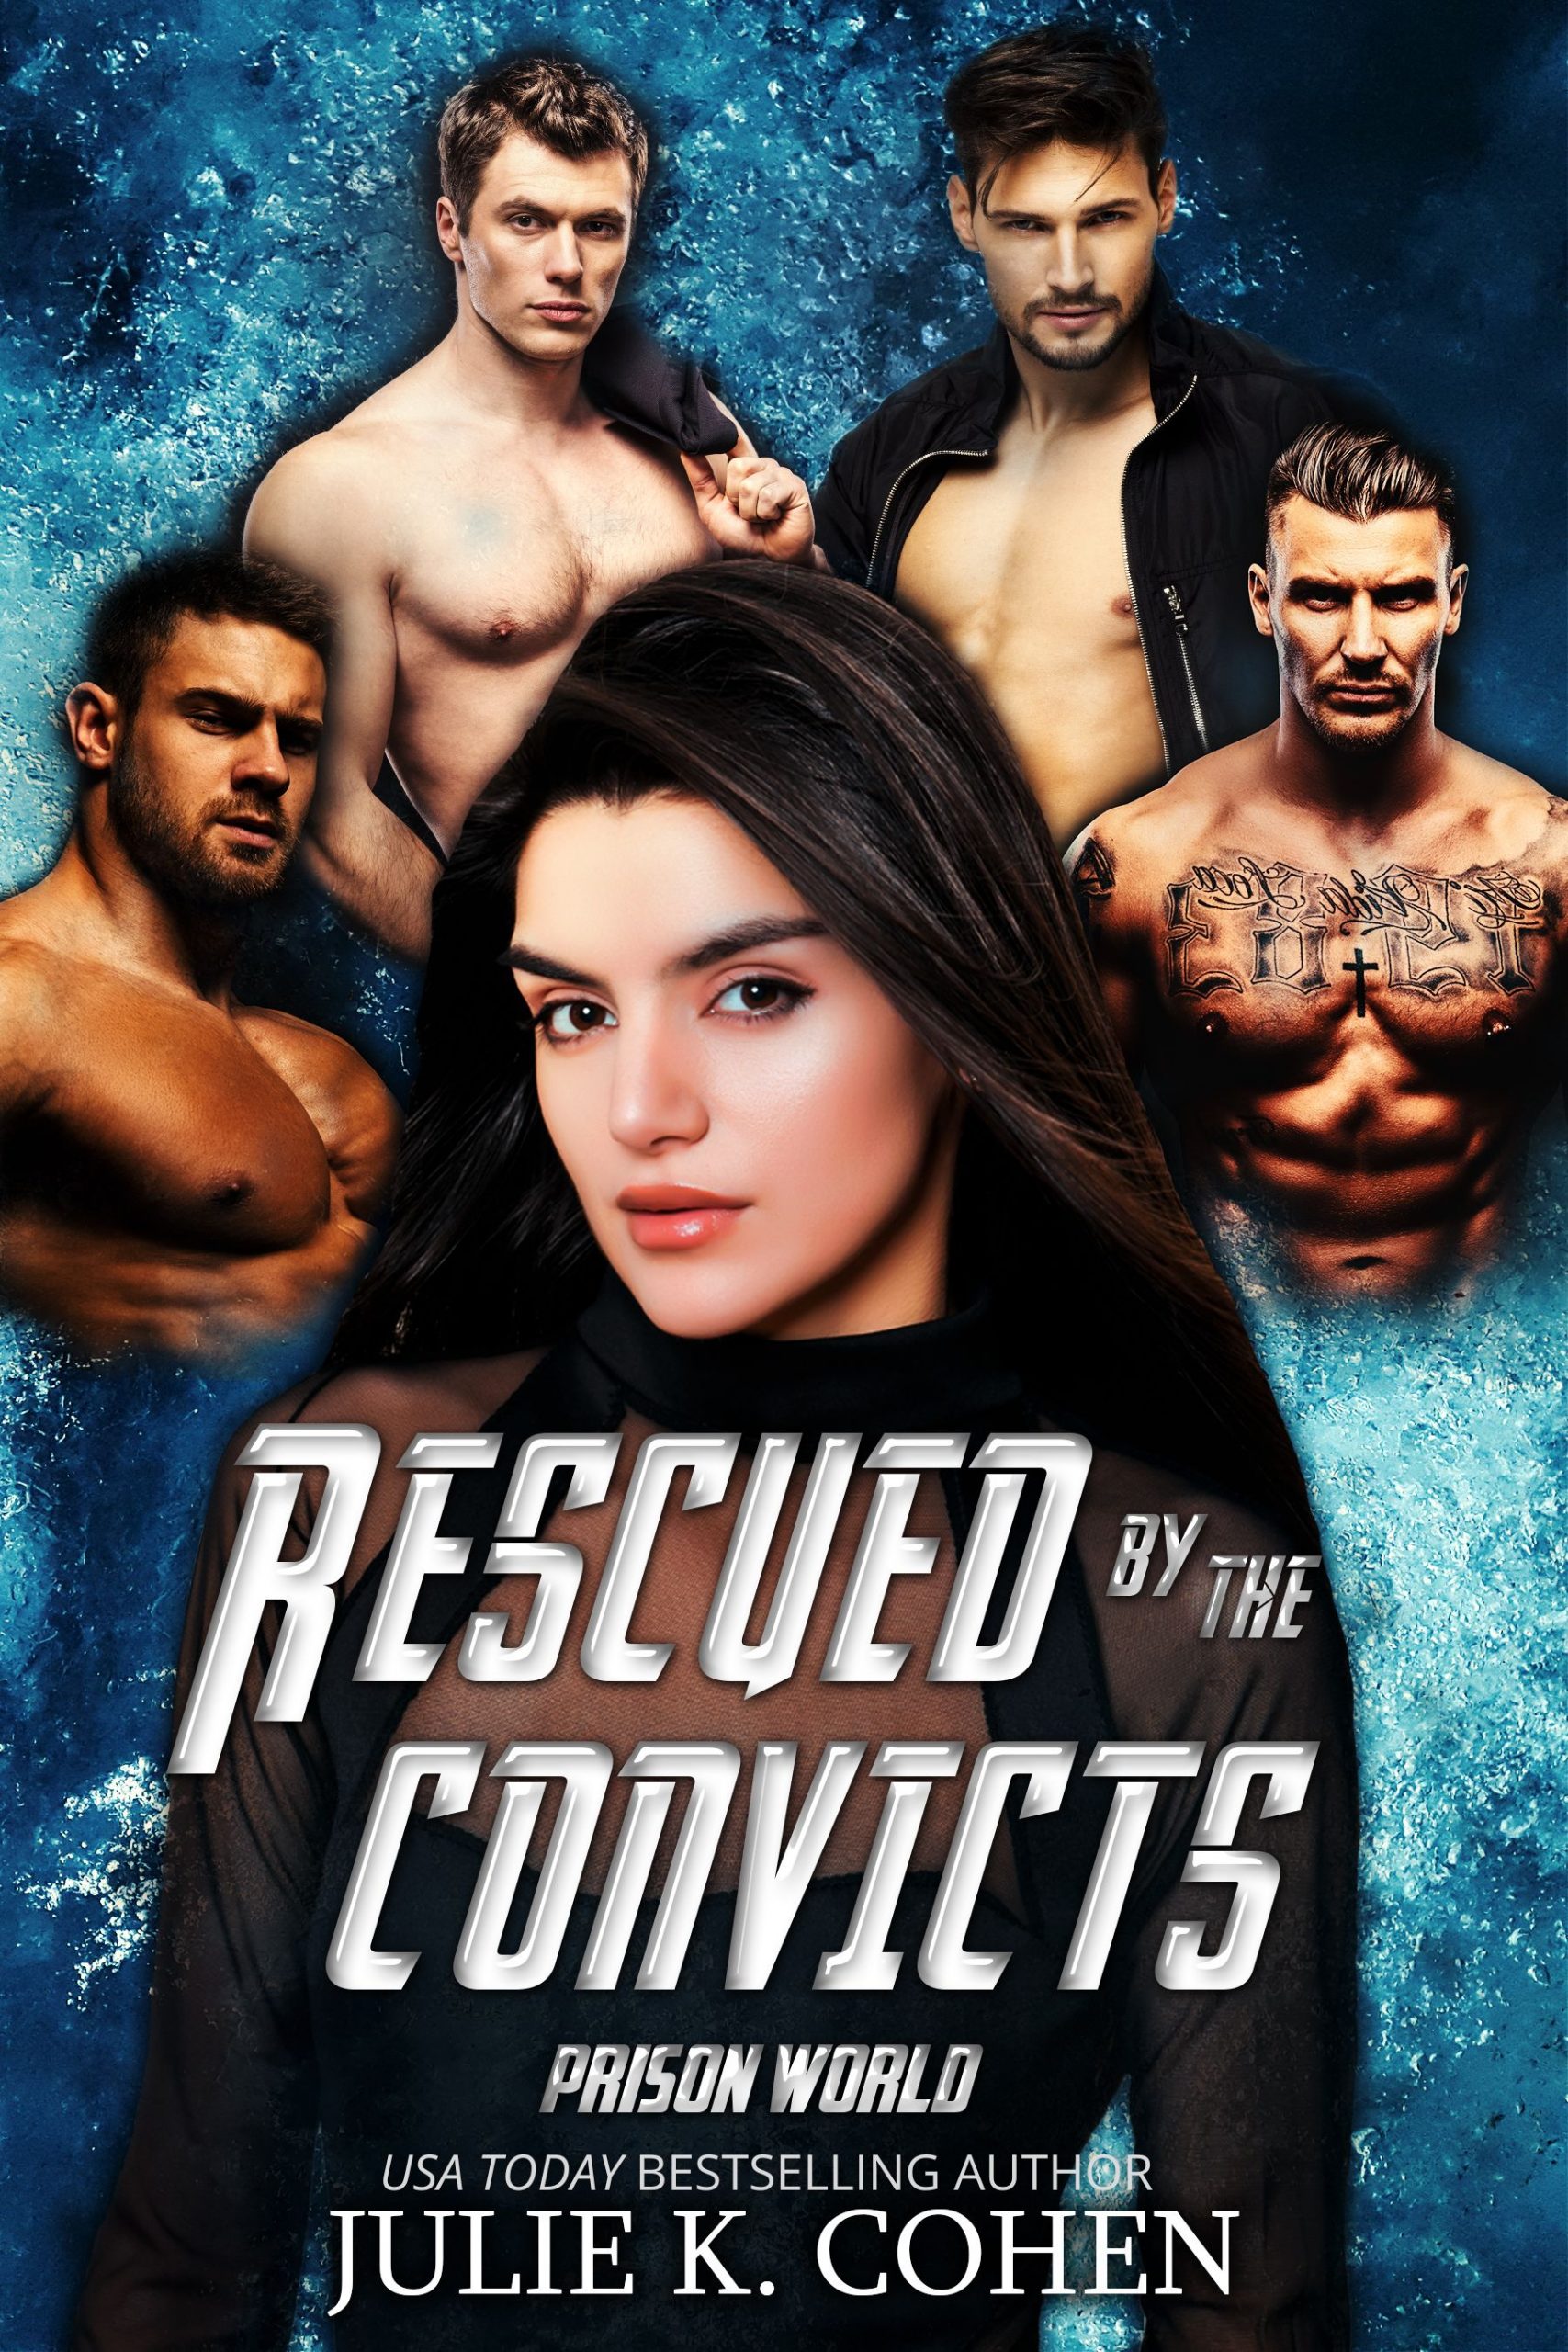 Prison World series, cover for Rescued by the Convicts